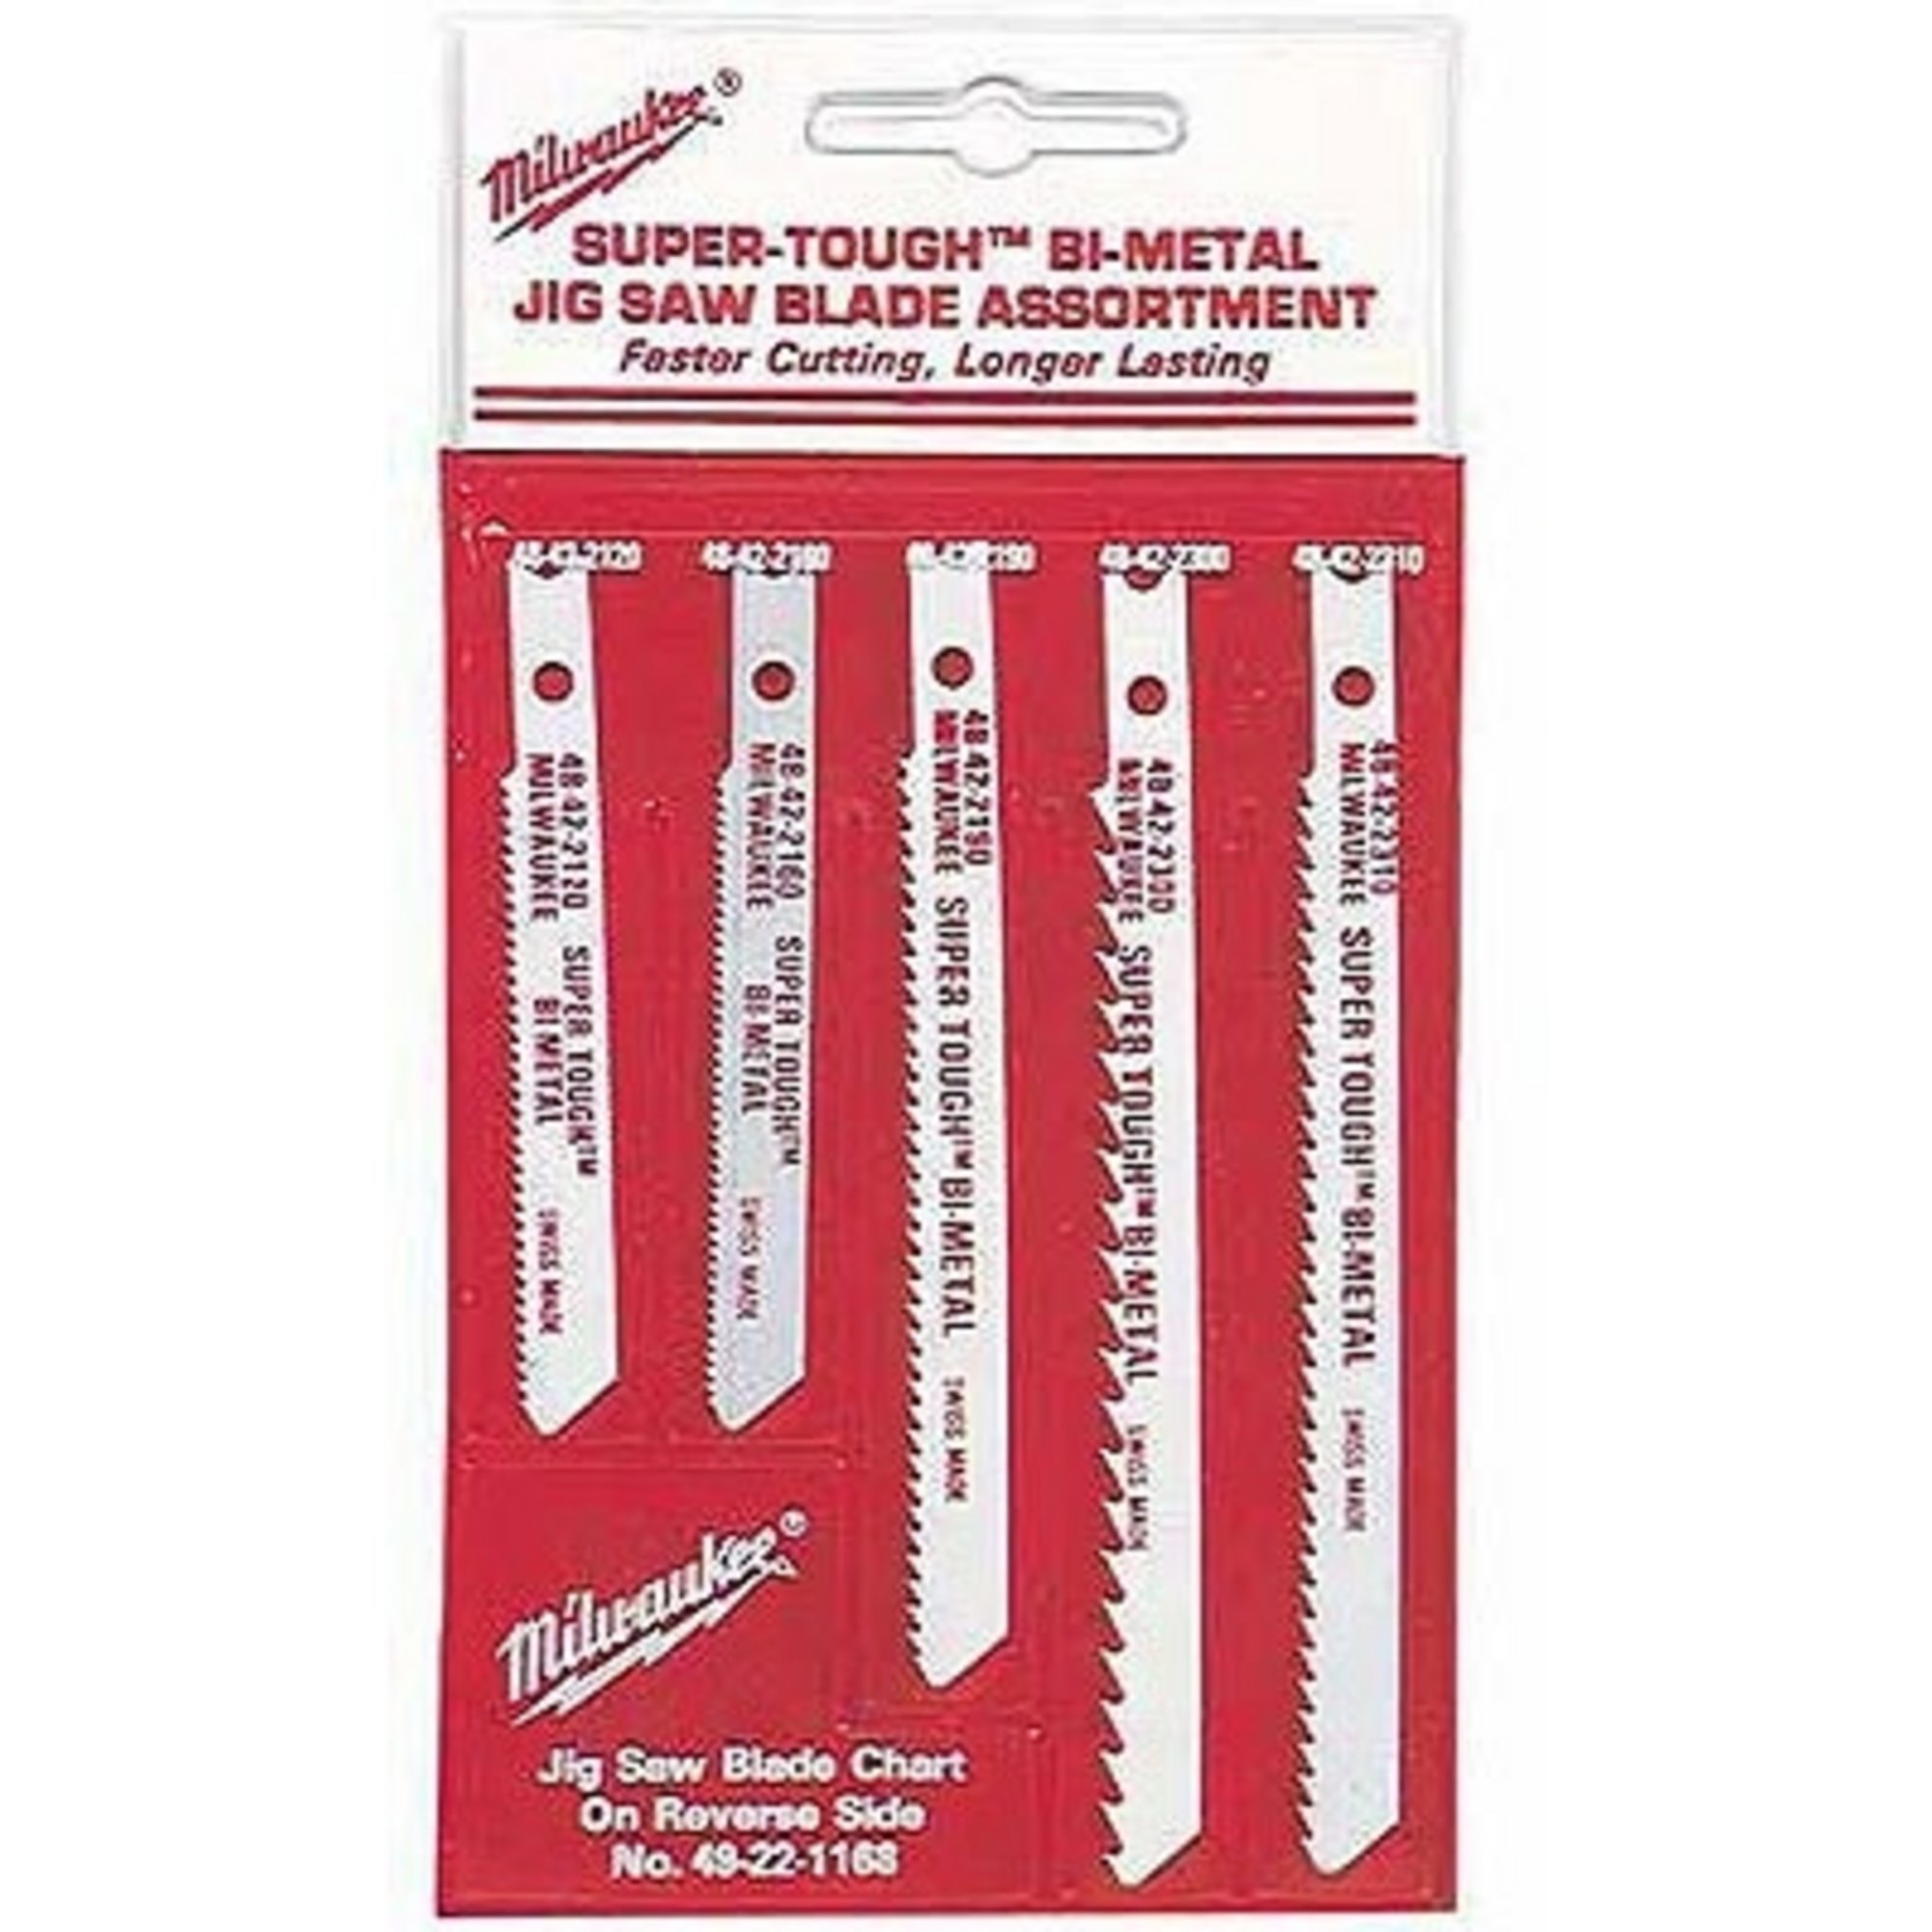 Milwaukee 5-Pack Assorted Jig Saw Blades, 4Inch, Model 49-22-1168